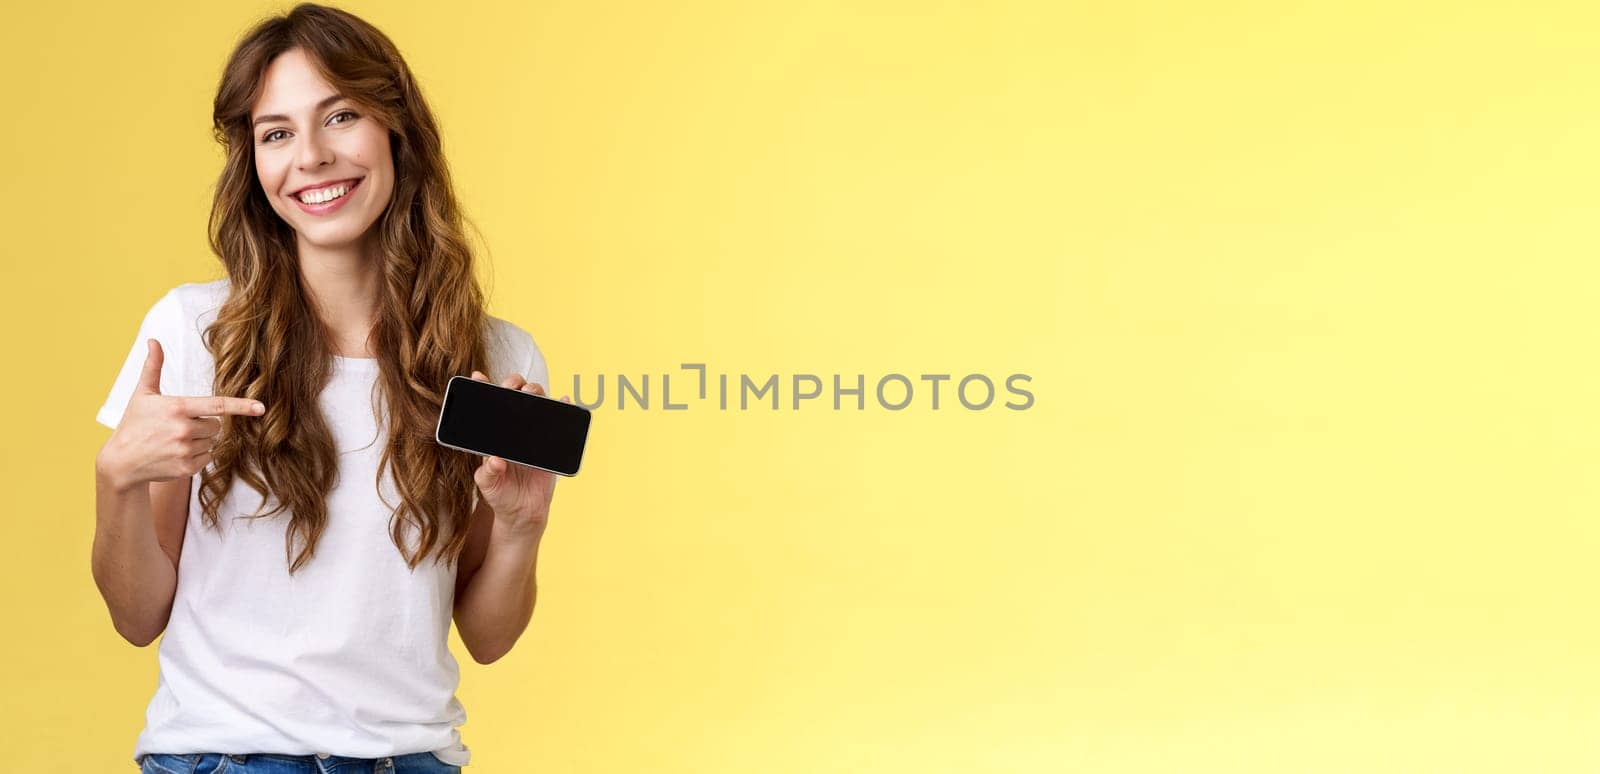 Cheerful good-looking friendly carefree young girl hold smartphone horizontal pointing index finger mobile phone screen smiling broadly introduce awesome game app stand yellow background.